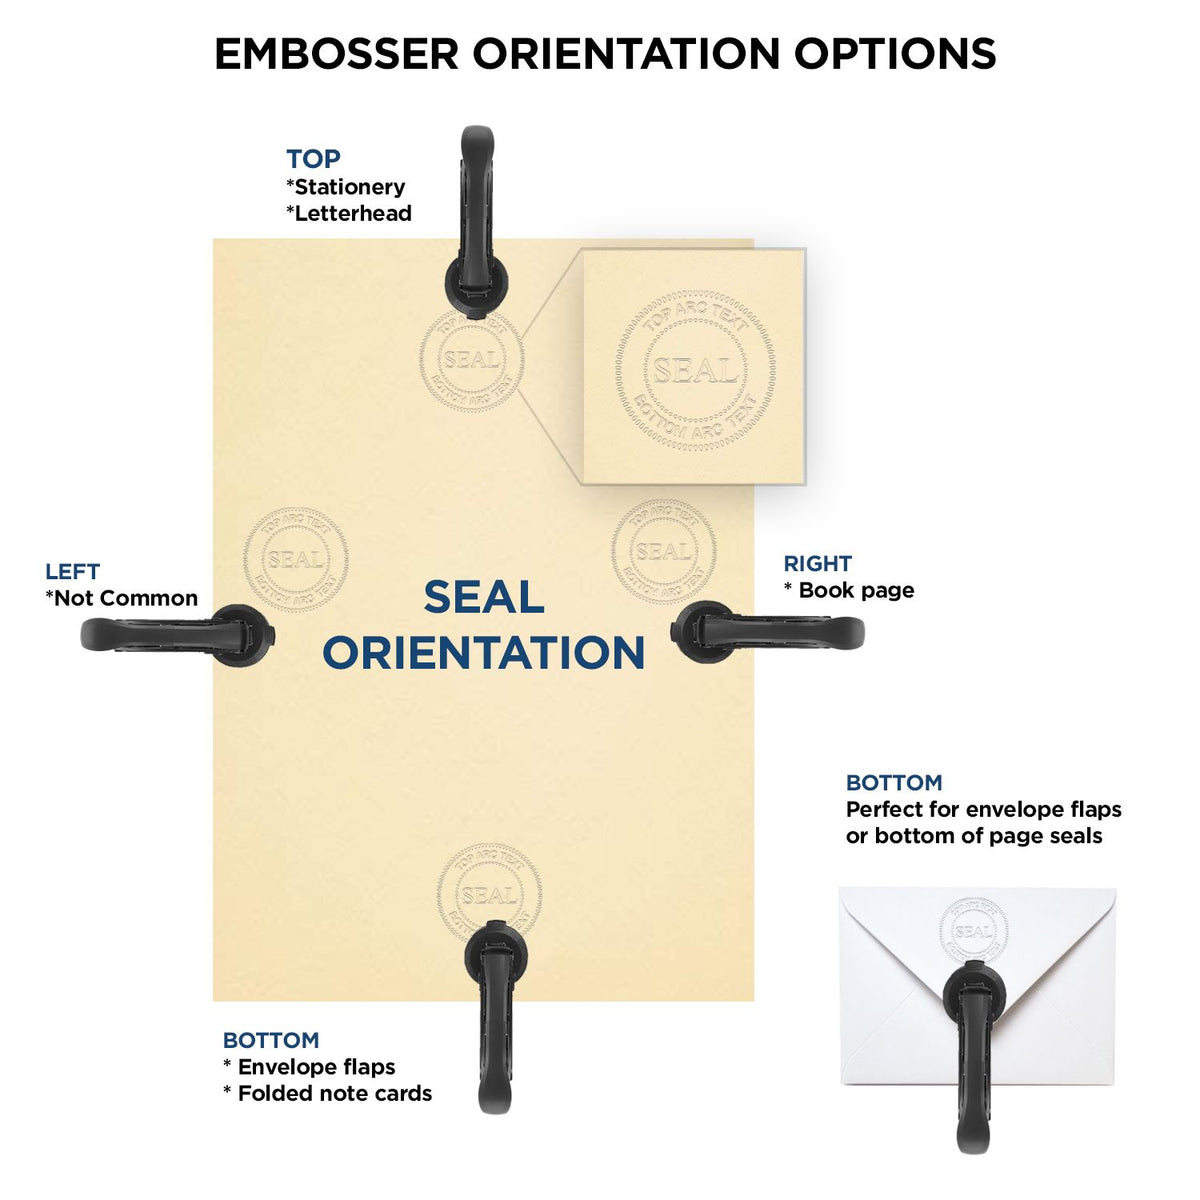 An infographic for the Hybrid Nevada Land Surveyor Seal showing embosser orientation, this is showing examples of a top, bottom, right and left insert.